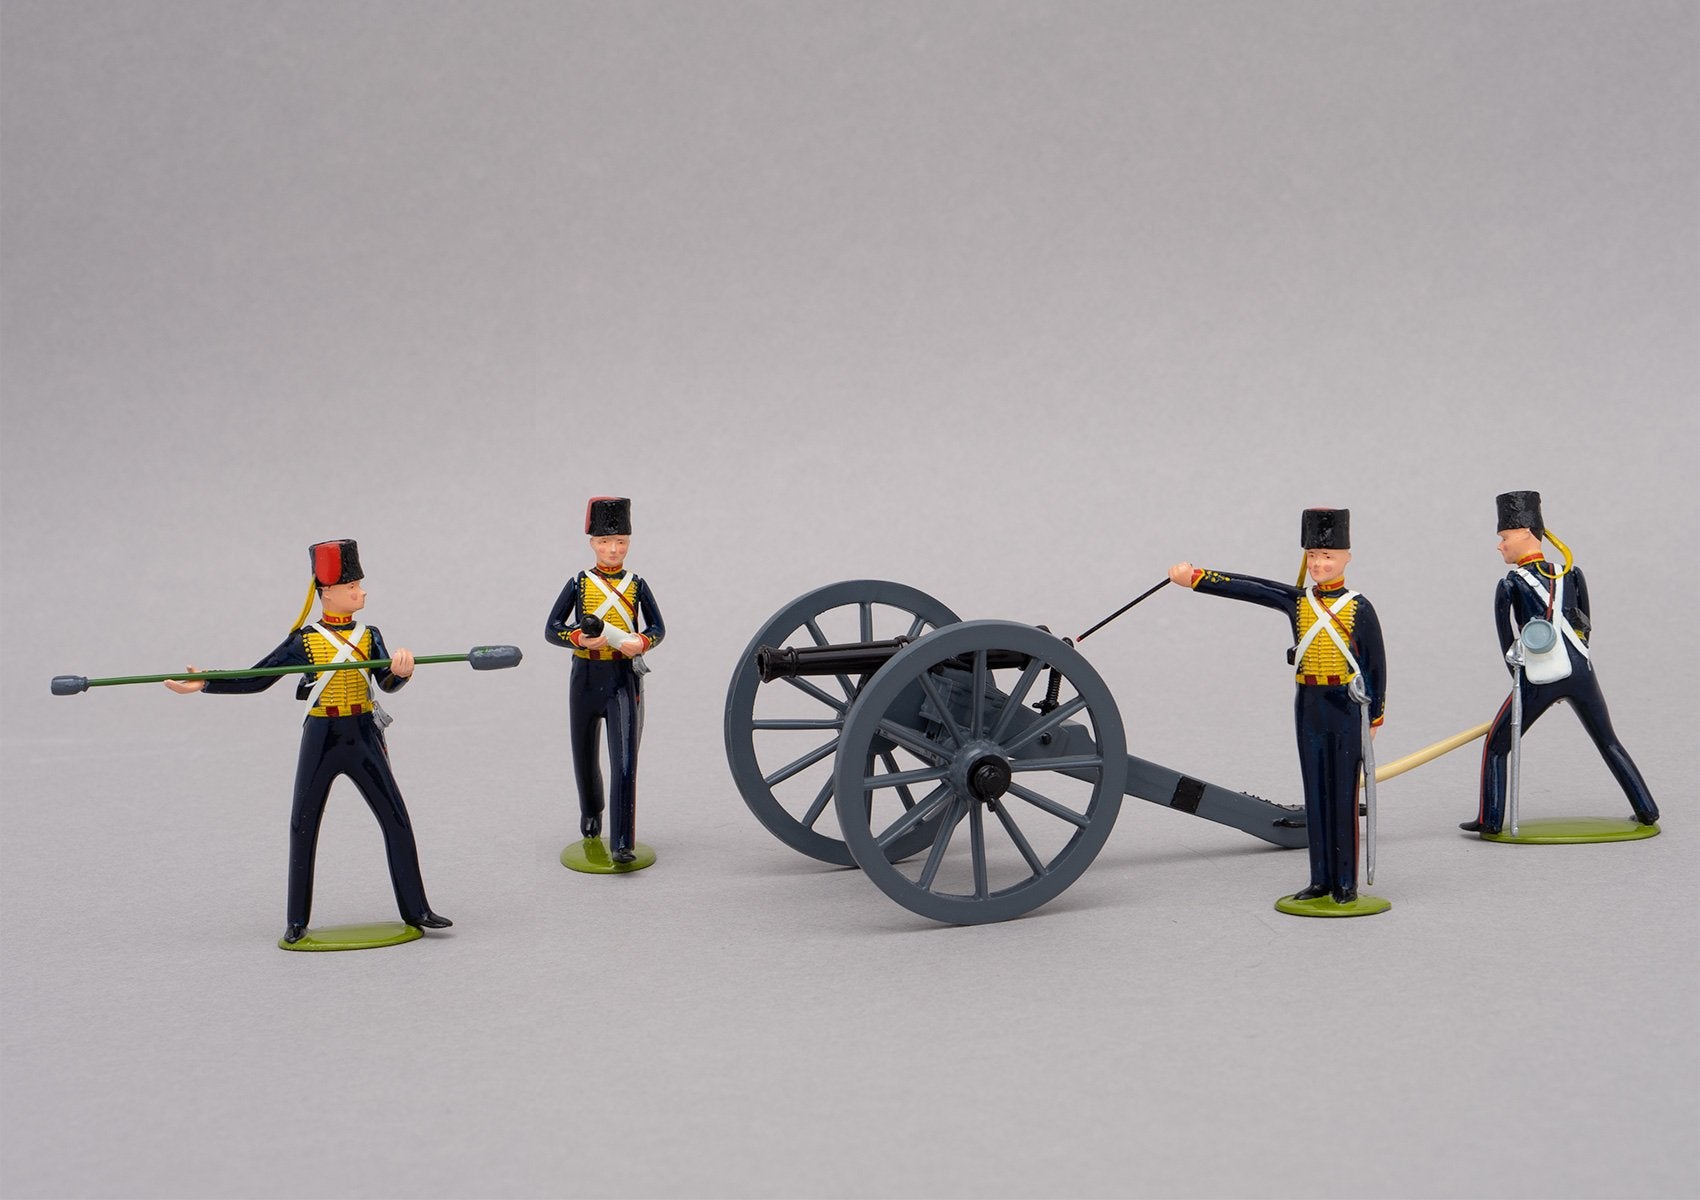 Set 83 Royal Horse Artillery 1854 | British | Crimean War | Artillery piece with four gunners and ammunition crate | Balaclava, Sevastapol, Alma, Charge of the Light Brigade | © Imperial Productions | Sculpt by David Cowe